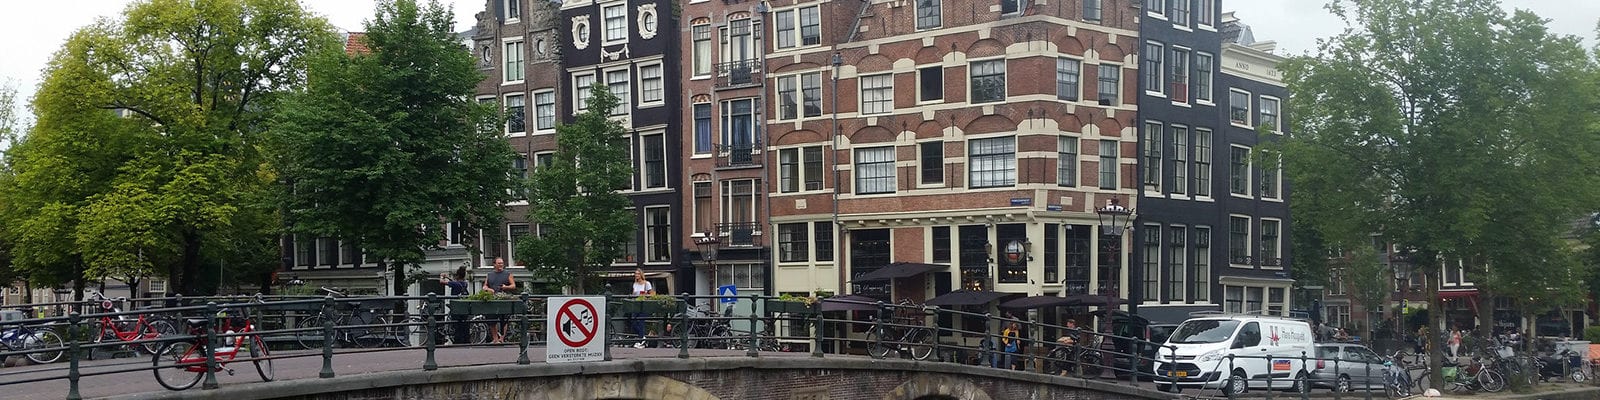 A bridge with people on it and houses behind it in Amsterdam.